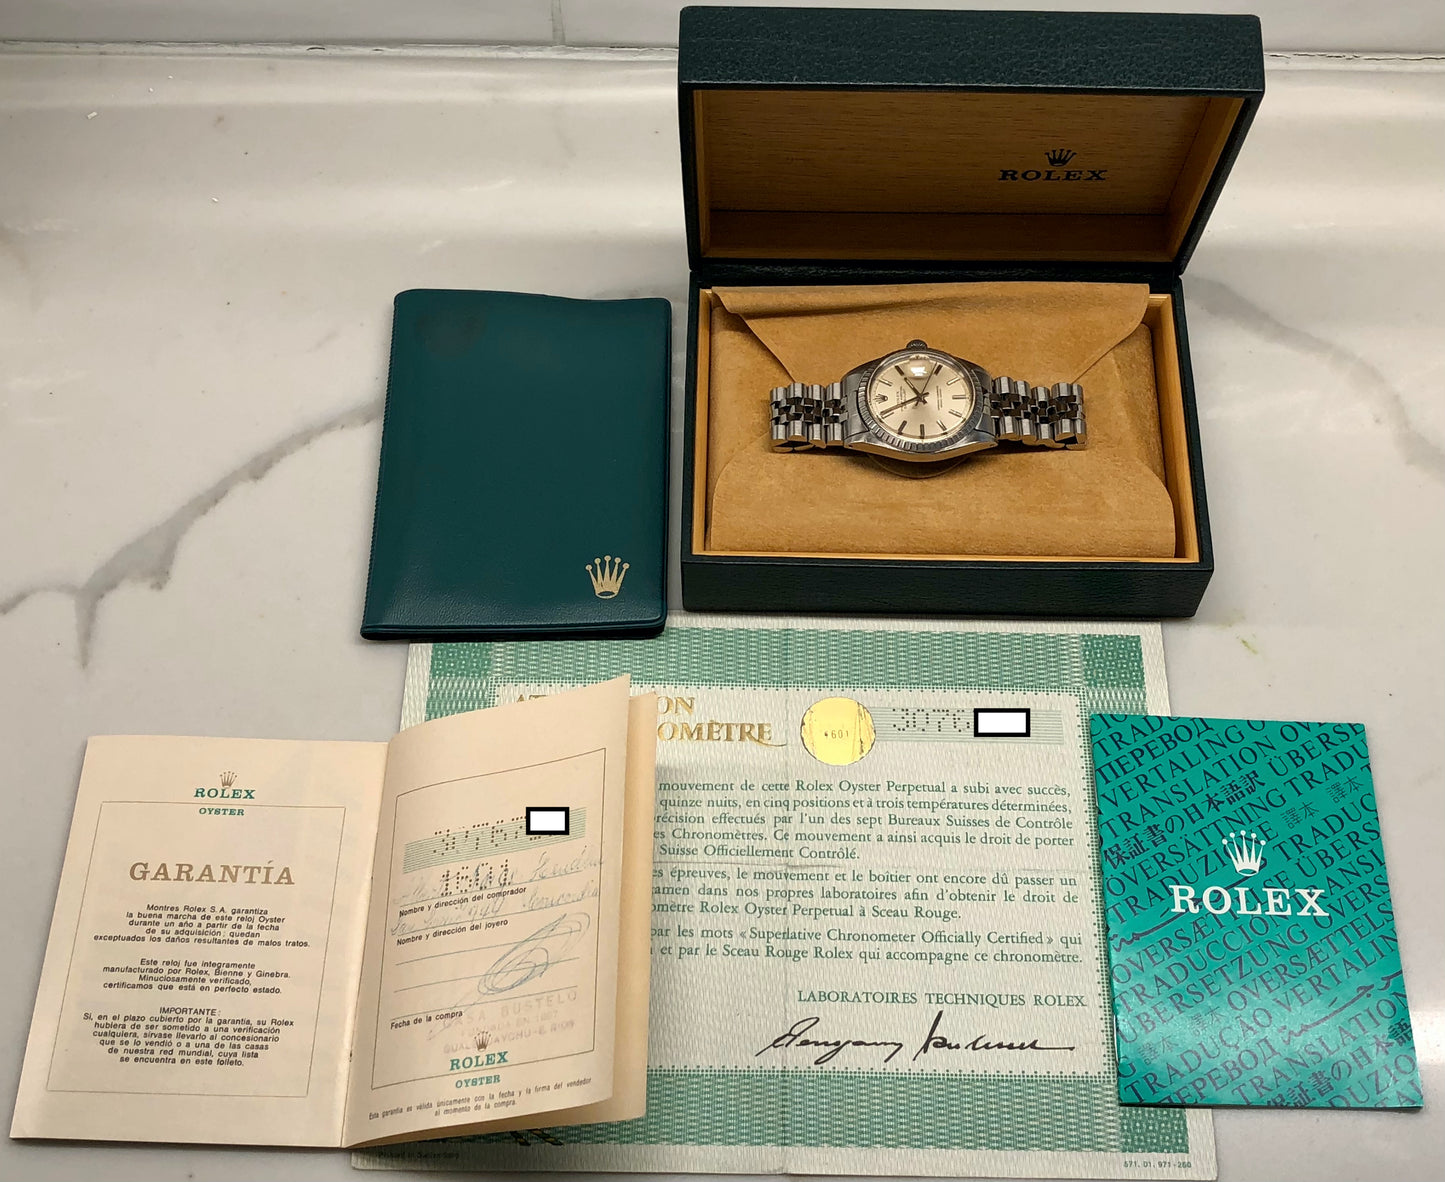 1971 Rolex Datejust 1601 Steel Engine Turned Jubilee Silver Dial Wristwatch Box Papers - Hashtag Watch Co.